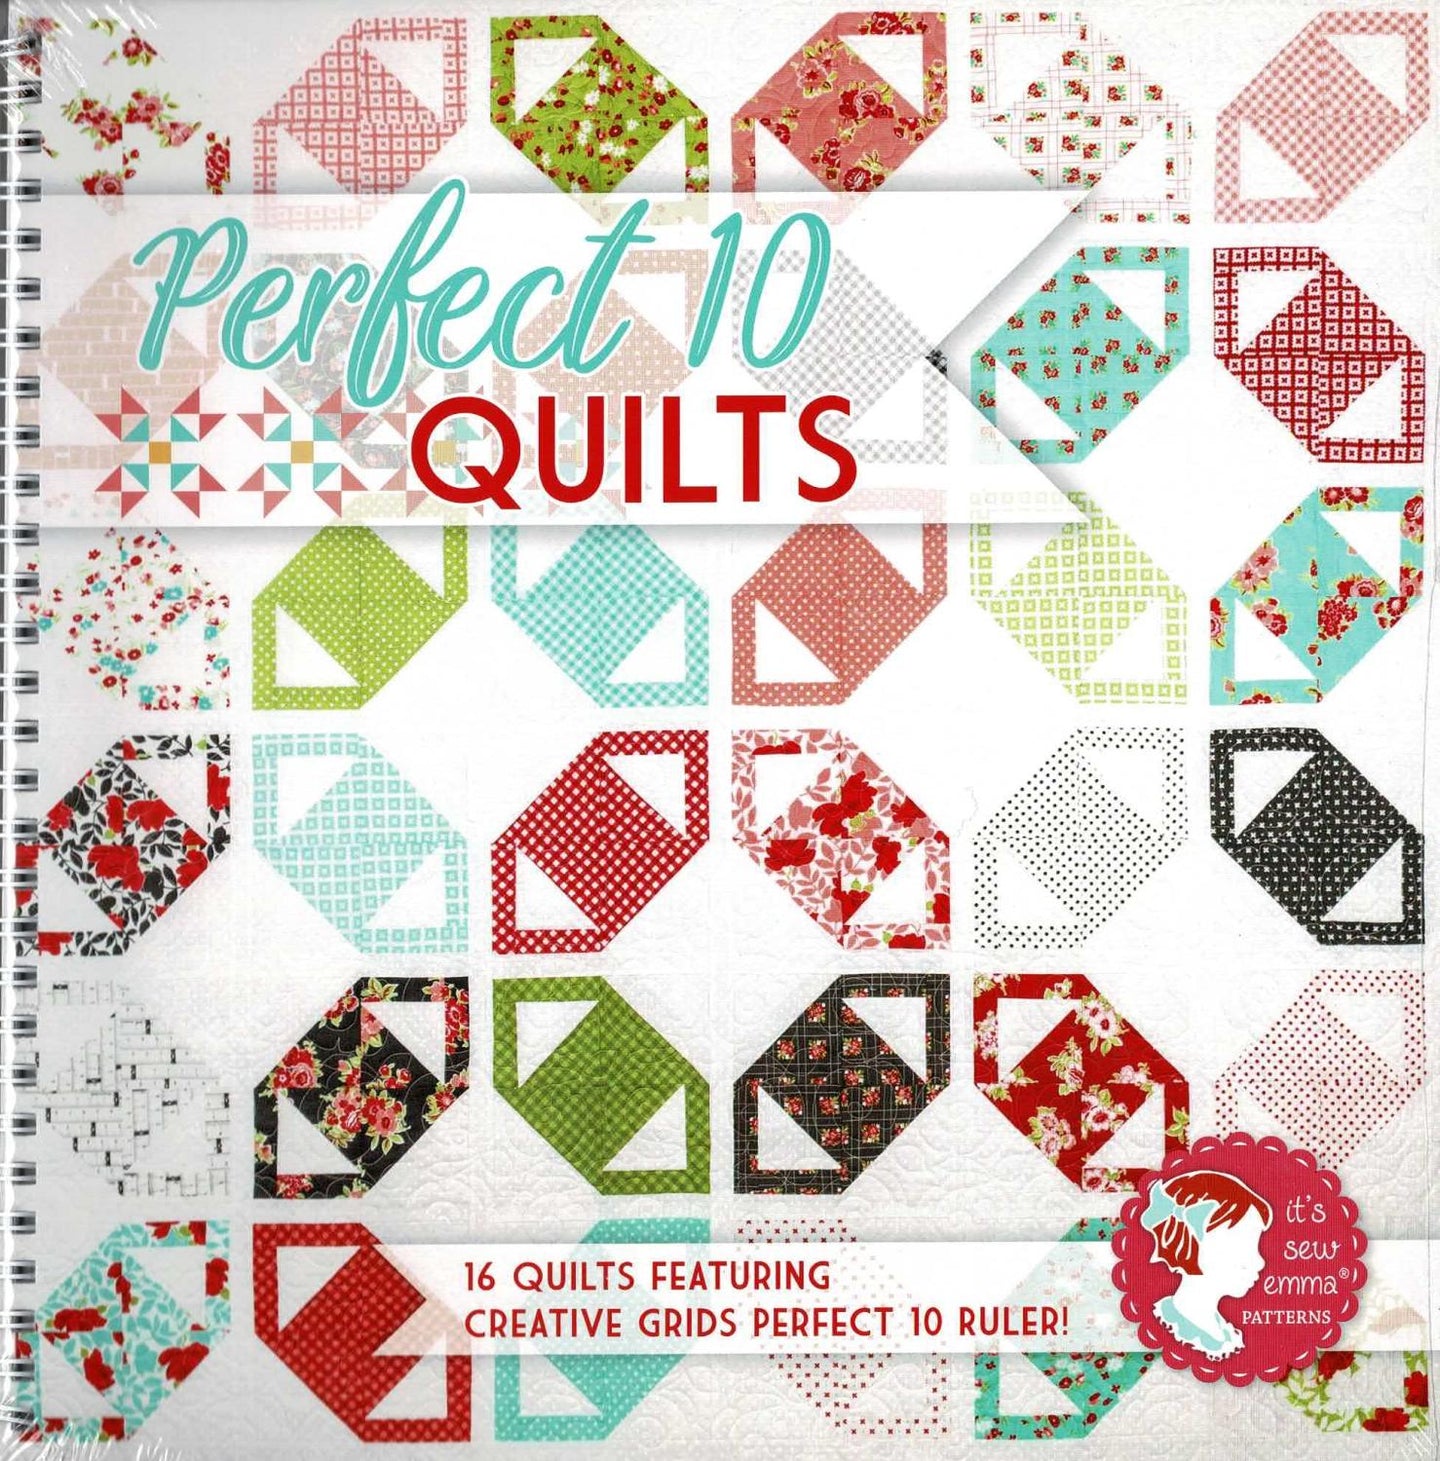 This Perfect 10 Book by It's Sew Emma contains 16 quilts featuring creative grids Perfect 10 Ruler. All quilts are made with the classic 10